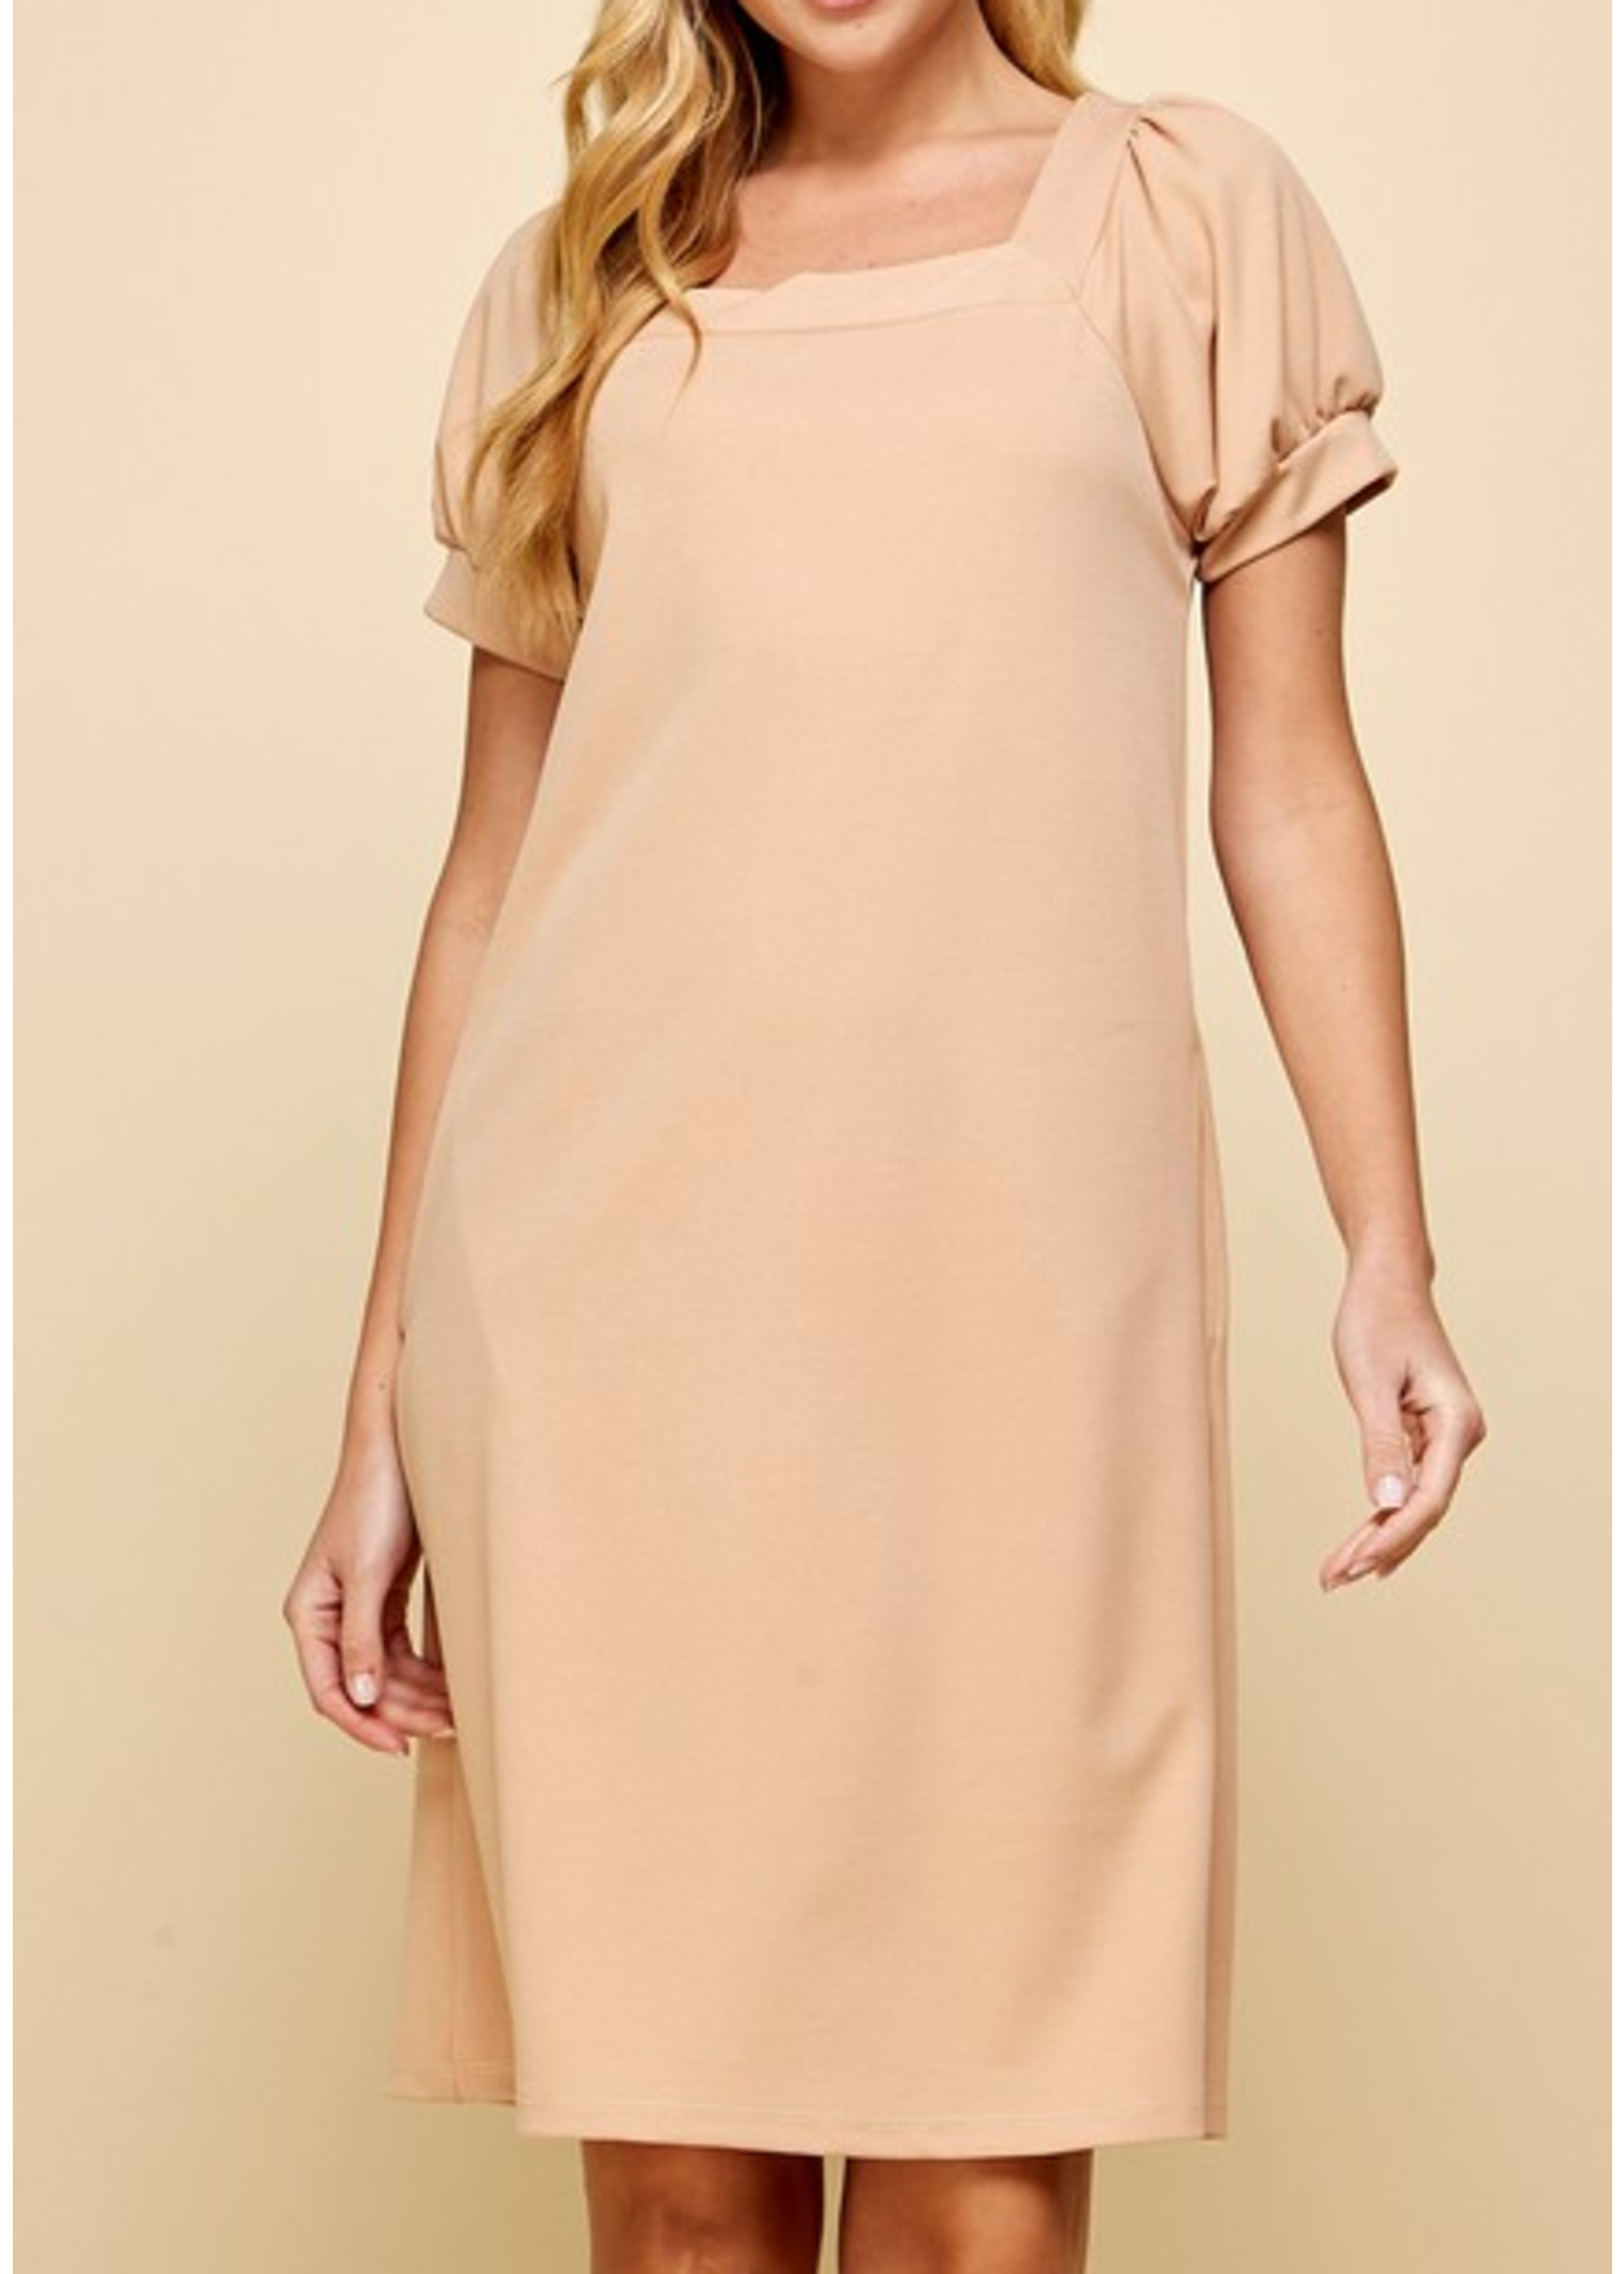 LAD1418 - Square Neck with Puffed Sleeves Shift Dress